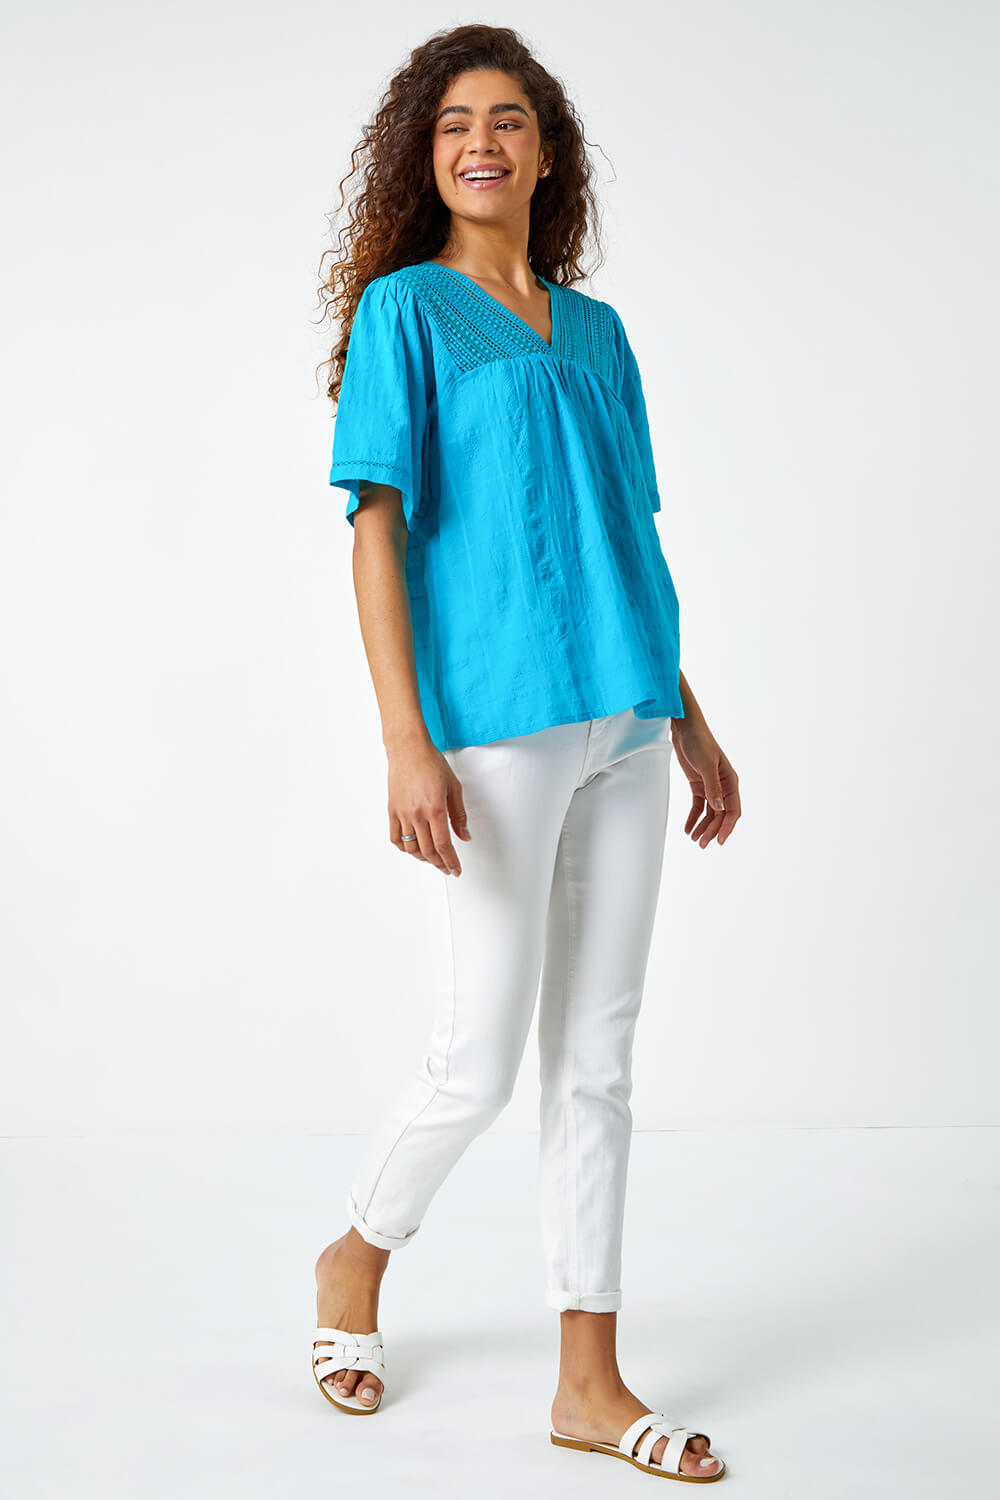 Turquoise Lace Detail Cotton T-Shirt, Image 4 of 5